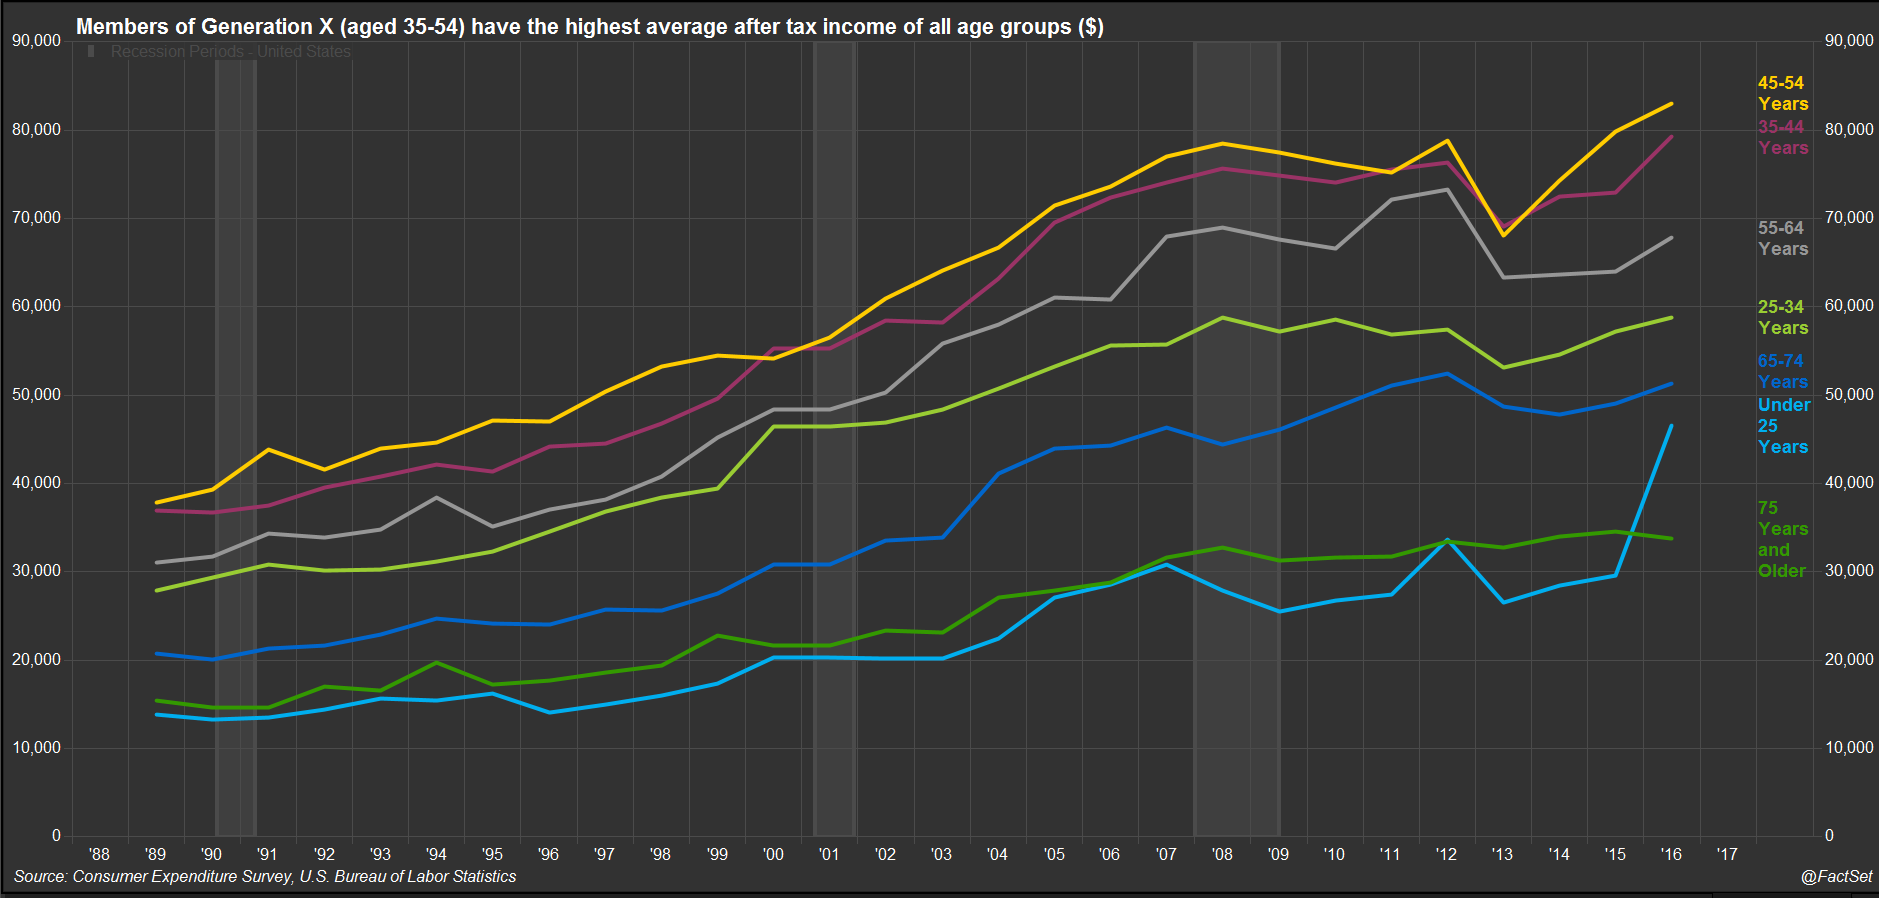 Americans in the 35 to 44 and 45 to 54 age groups had the highest average after tax income of all age groups;